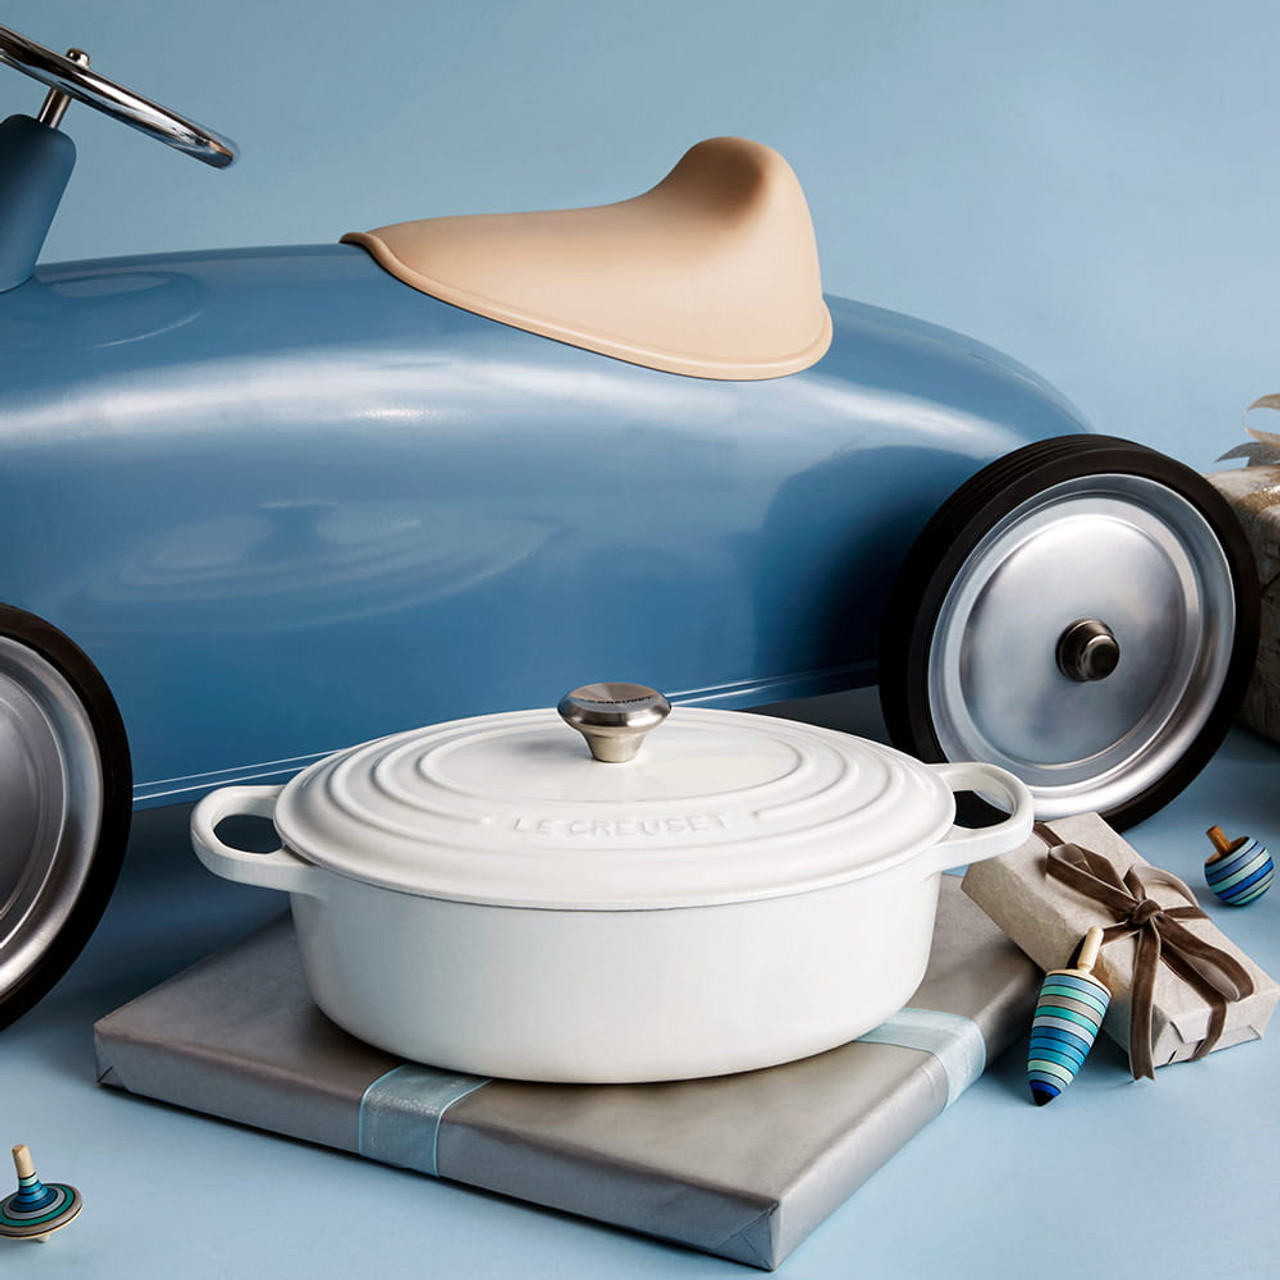 Le Creuset Oval Dutch Oven in White